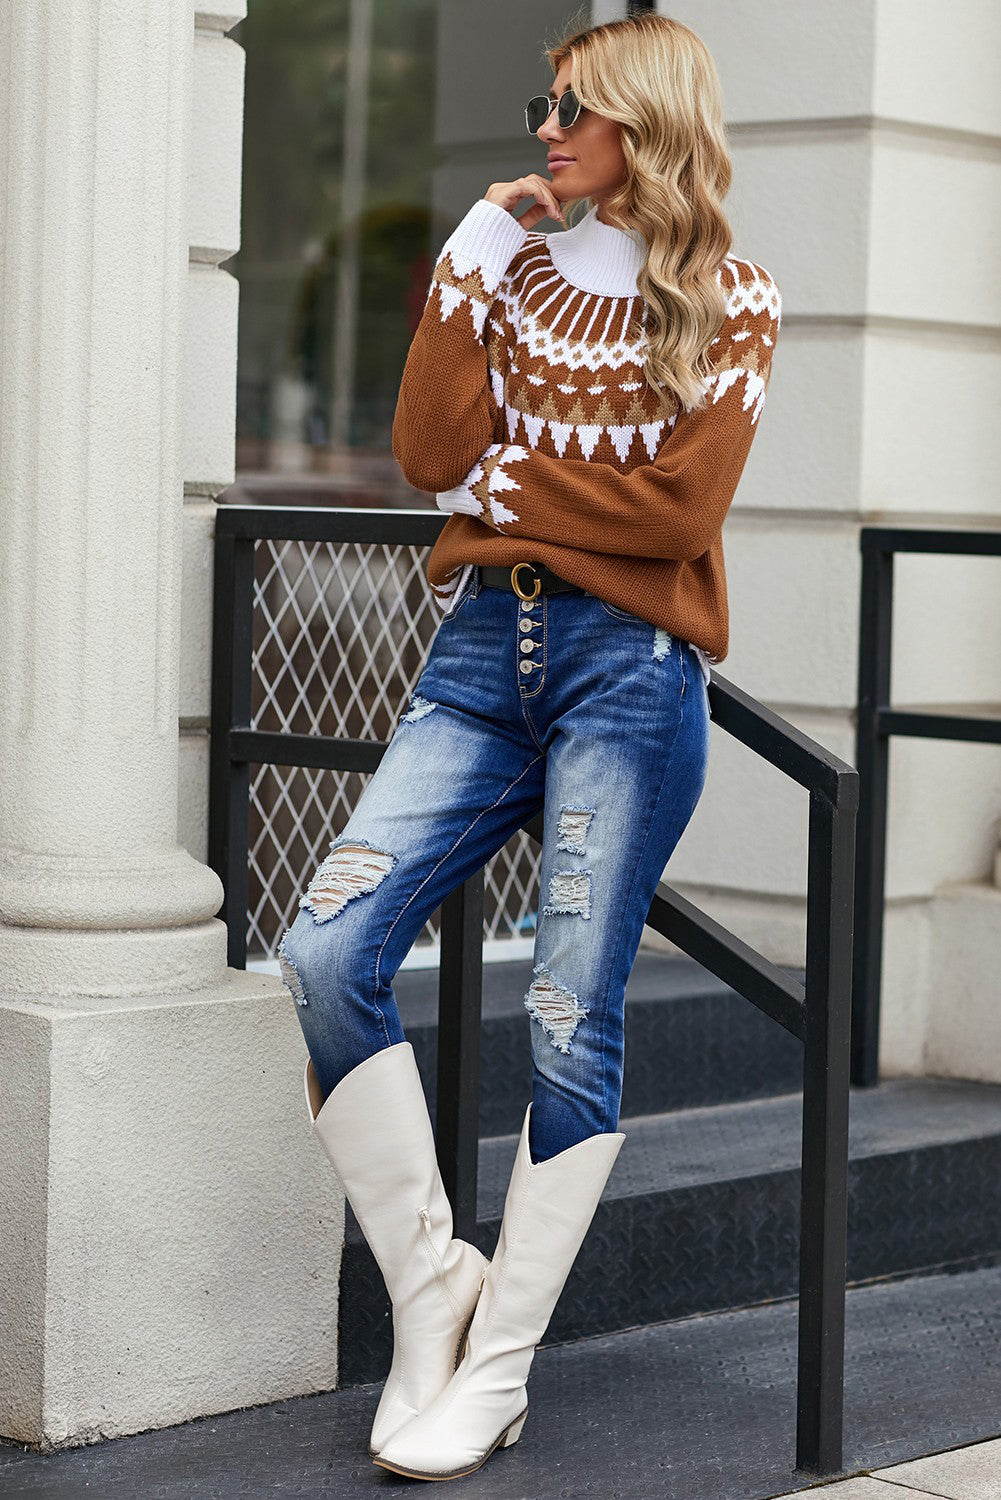 Apricot High Neck Printed Knit Sweater